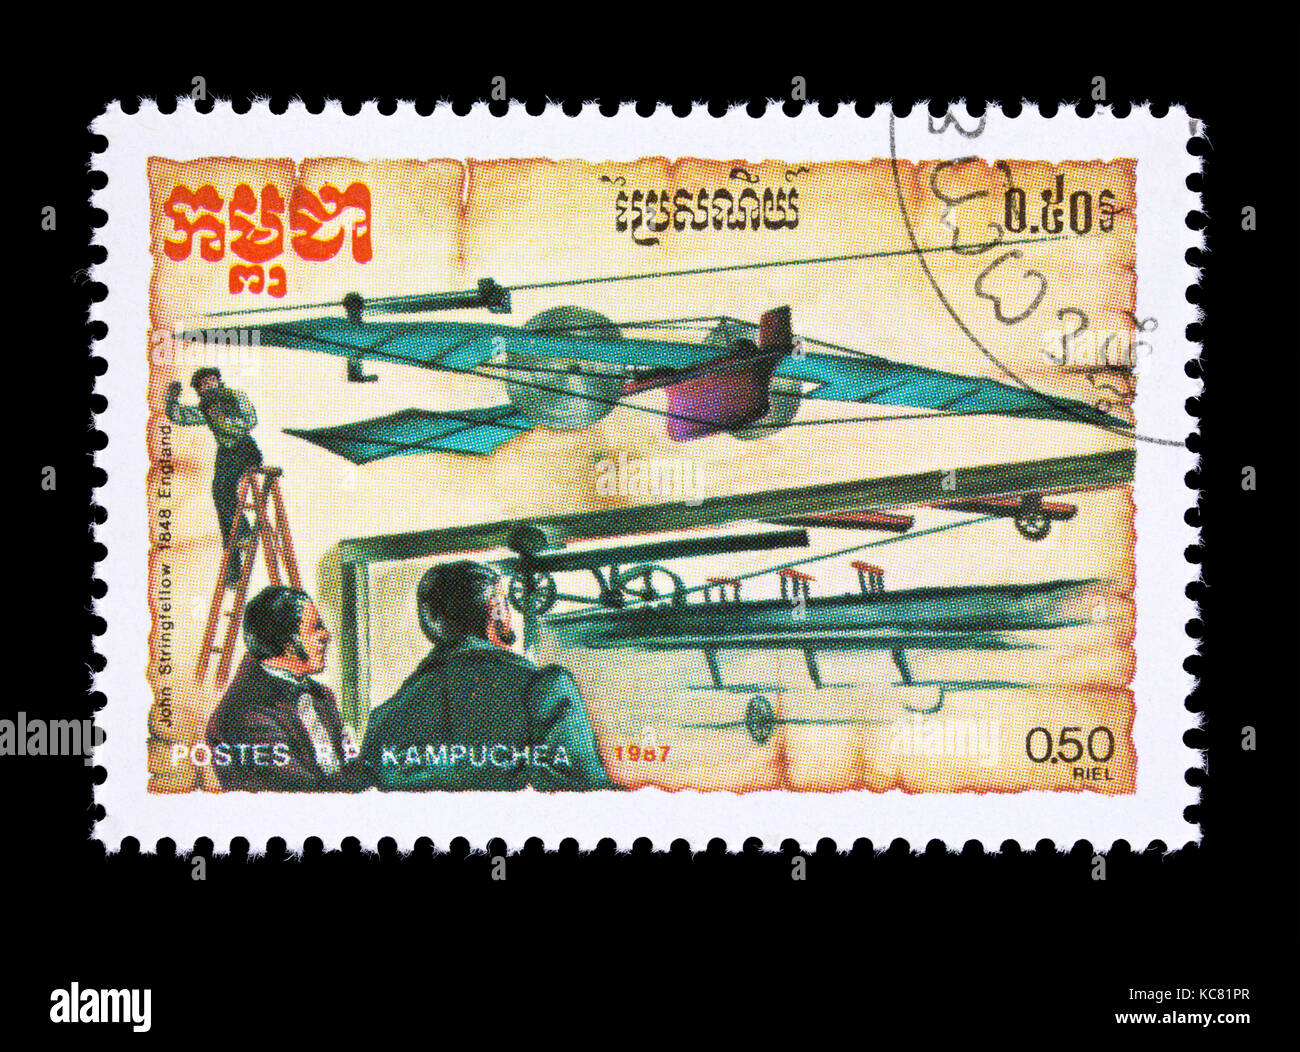 Postage stamp from Cambodia (Kampuchea)depicting an early airplane design by John Stringfellow, 1848. Stock Photo